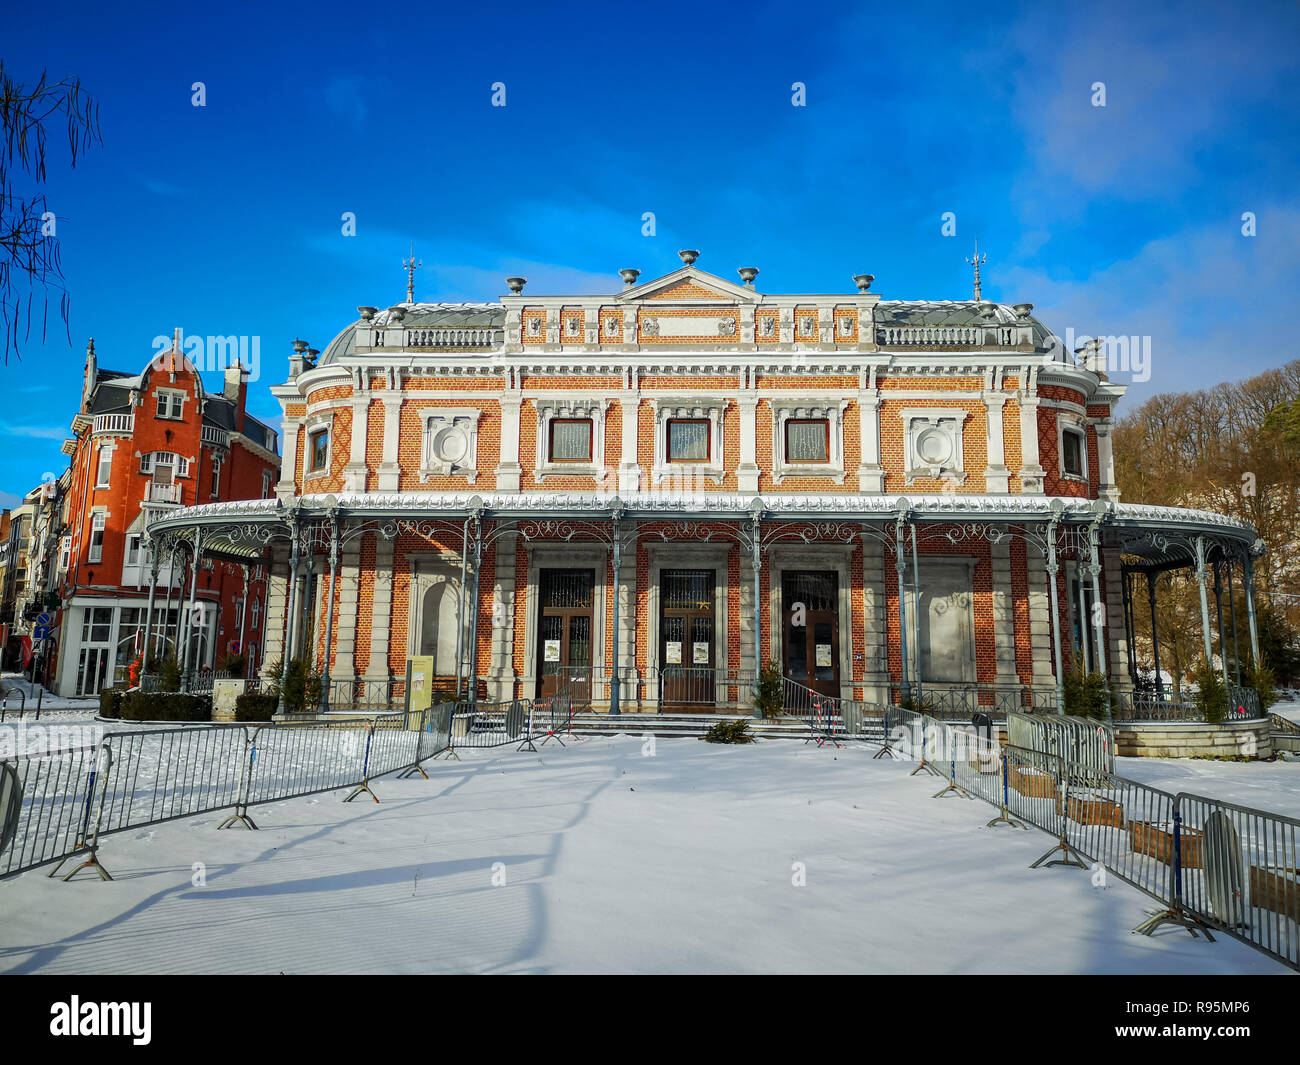 Historical pavilion Des Petits Jeux in the city center of Spa, Belgium. The pavilion is part of the Gallery Leopold II and the parc de Sept Heures. Stock Photo